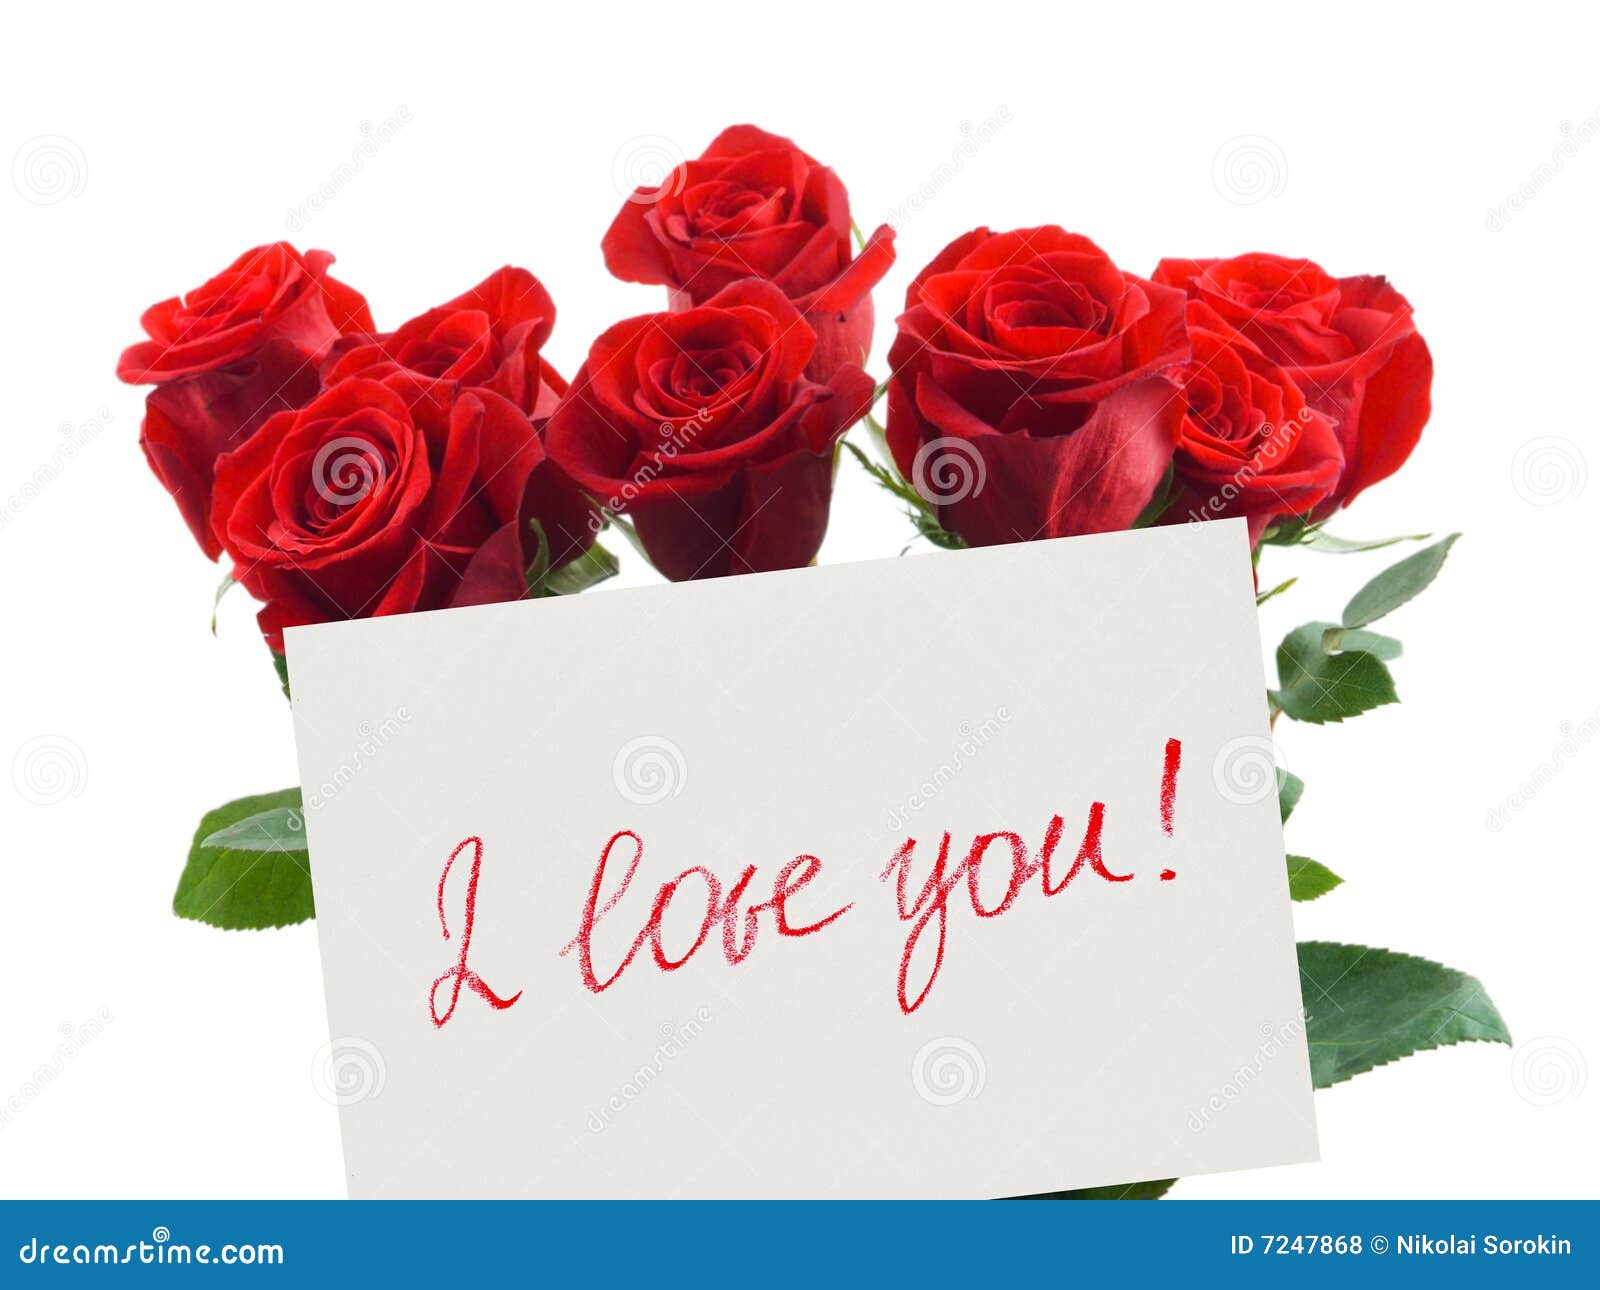 Card And Roses Royalty Free Stock Photos - Image: 7247868